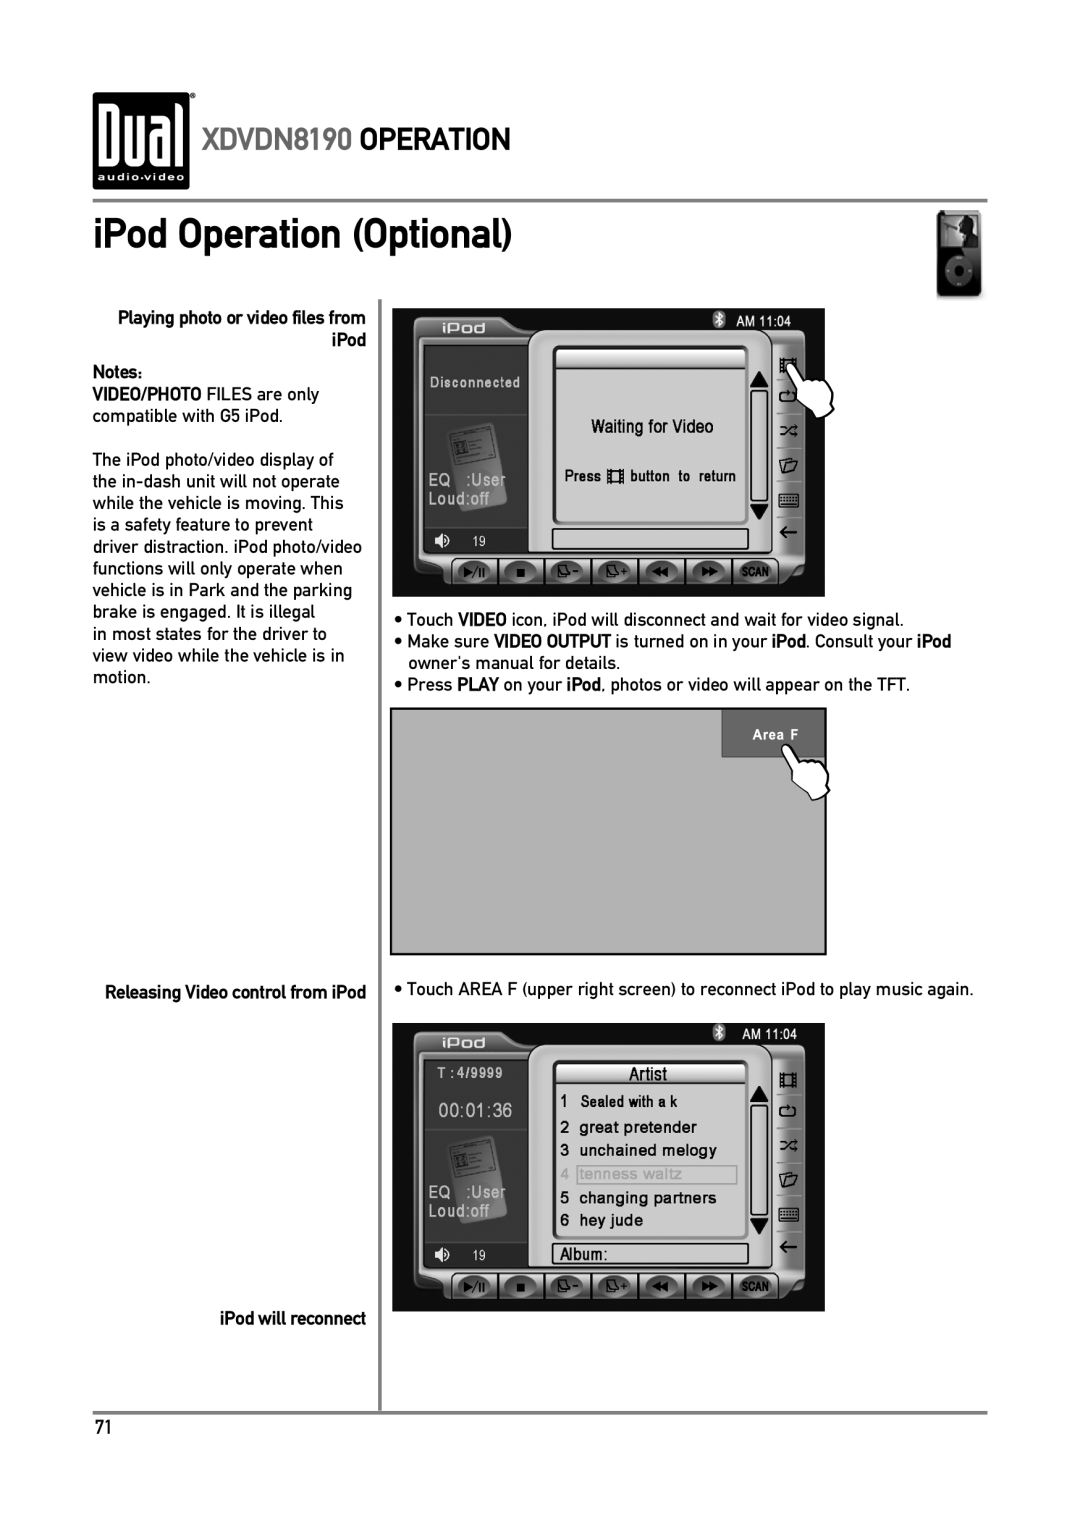 Dual owner manual iPod Operation Optional, XDVDN8190 OPERATION, iPod will reconnect 